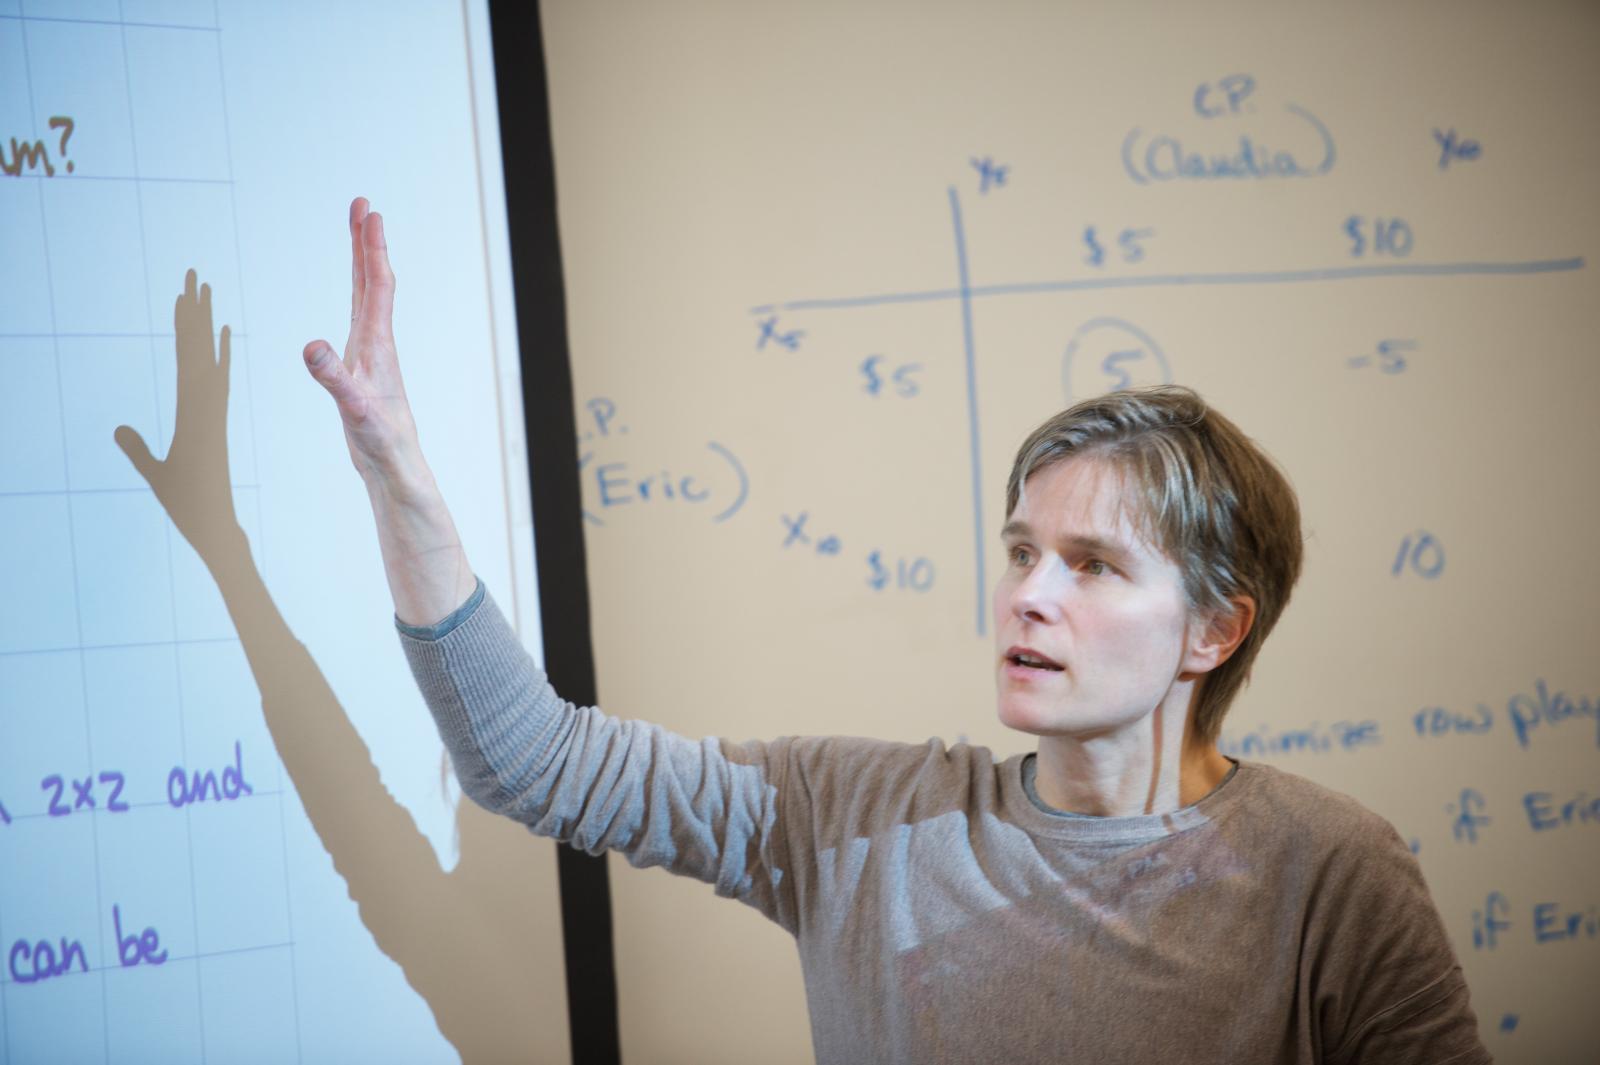 Instructor gestures toward equation on screen